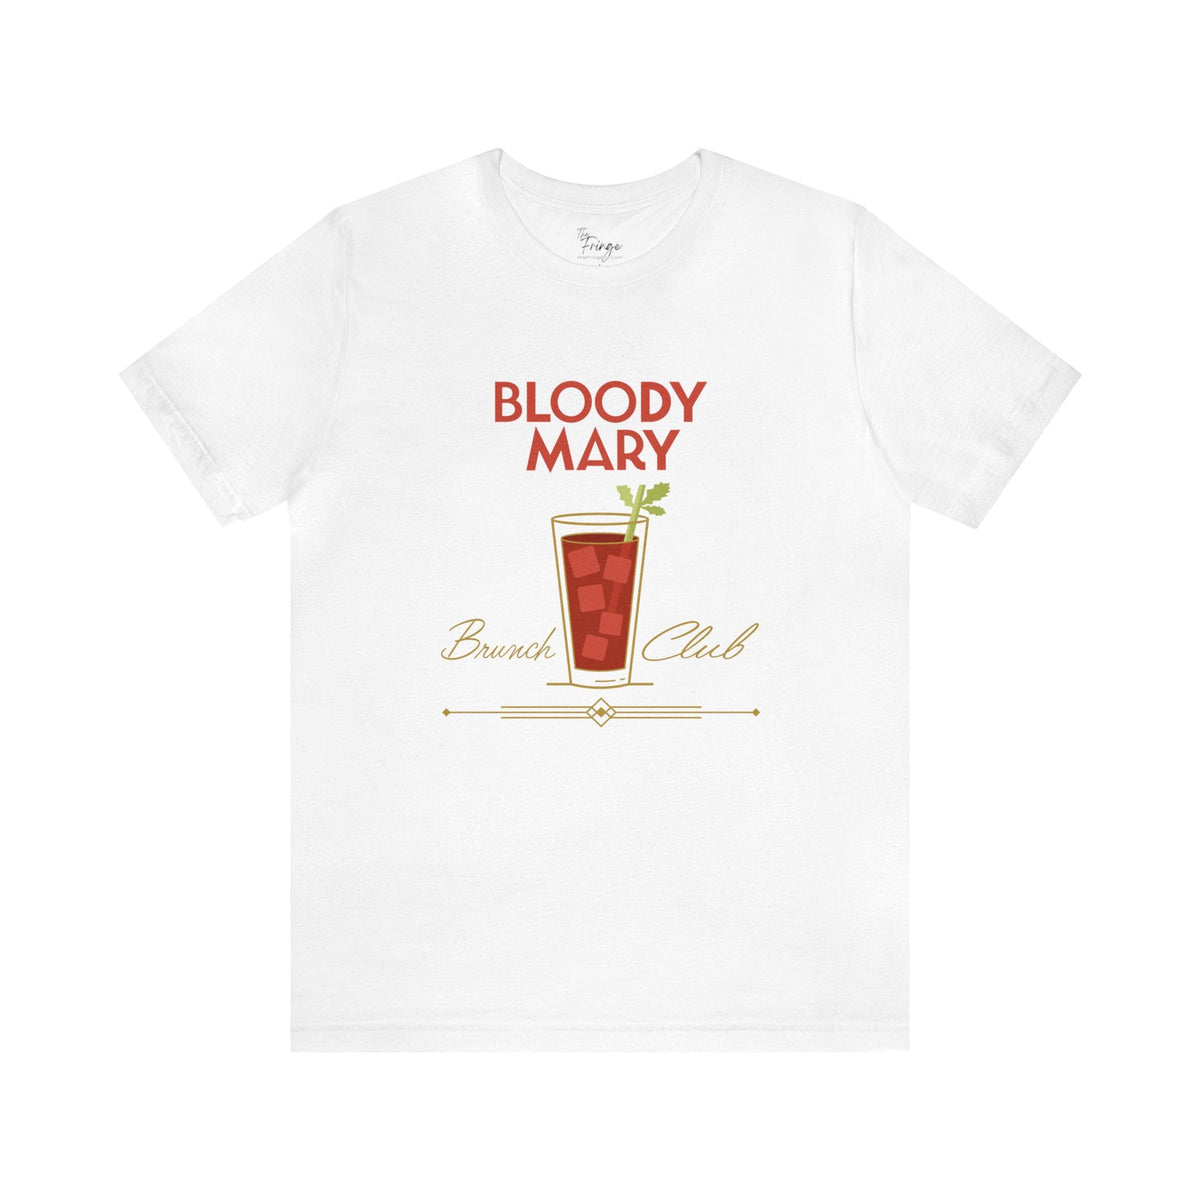 Bloody Mary Brunch Club Graphic Tee | Girls Day | Bottomless Bloody Marys | Brunching so hard T-Shirt TheFringeCultureCollective